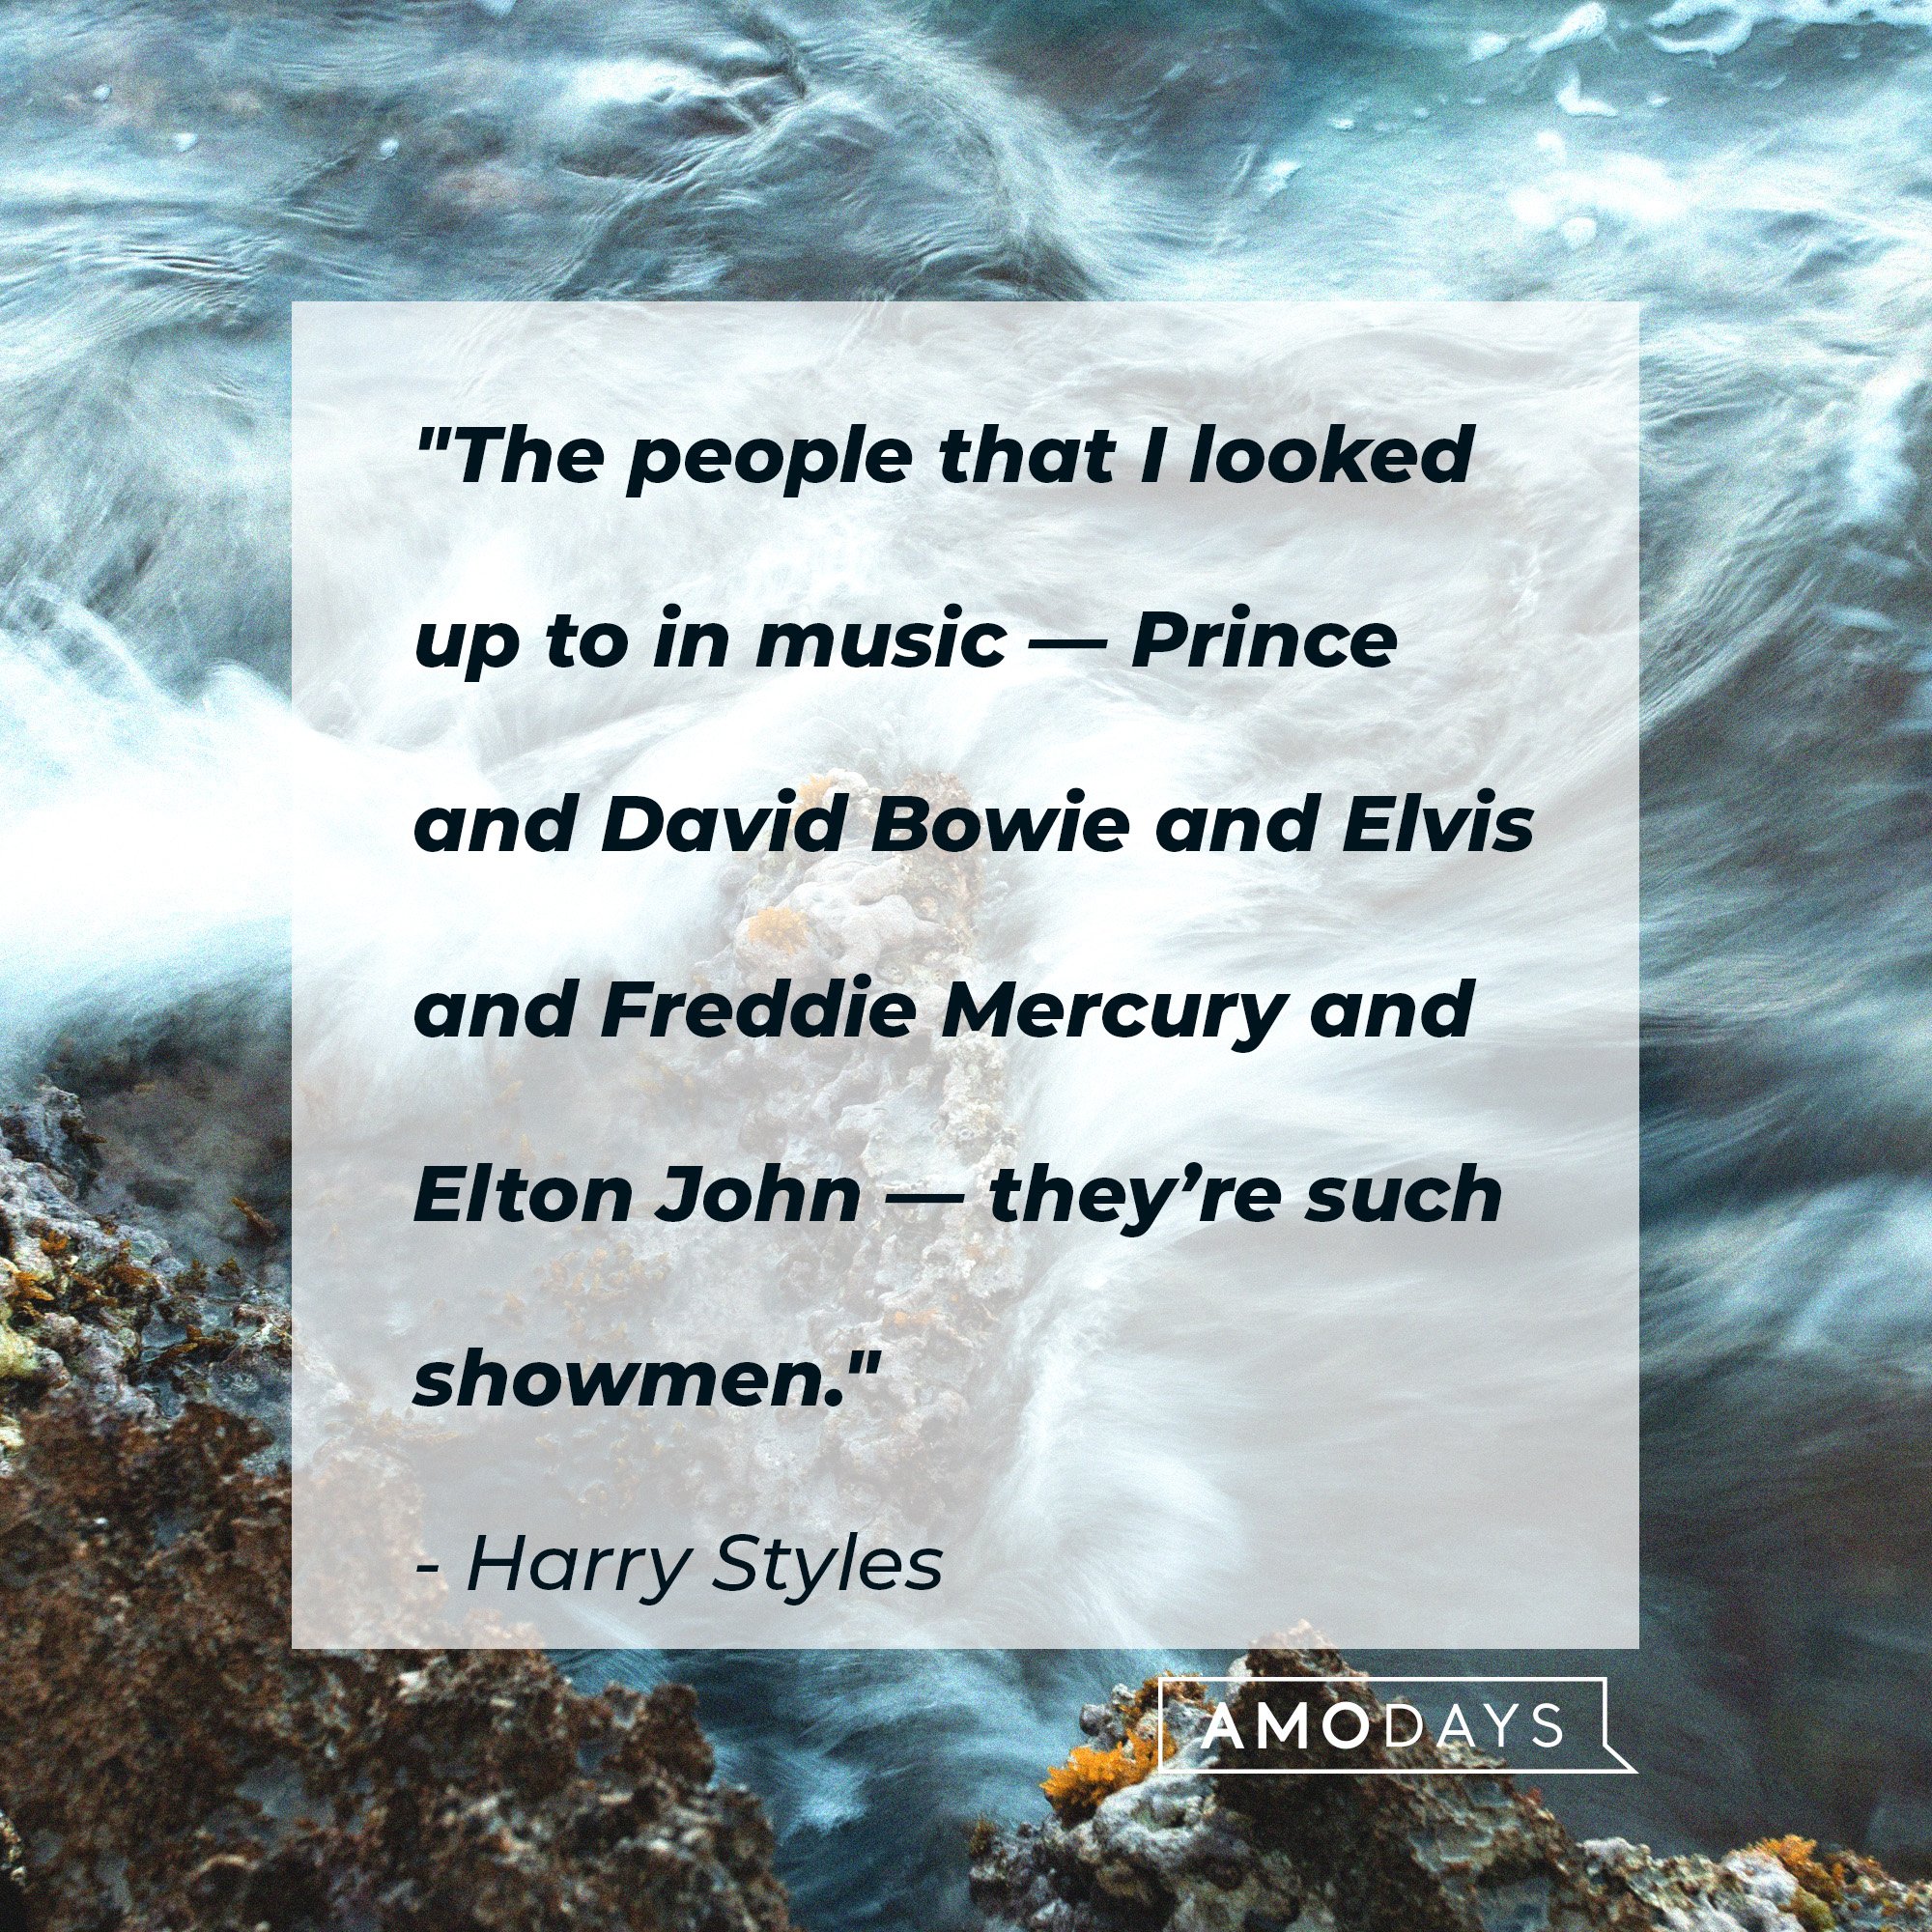 Harry Styles’ quote: "The people that I looked up to in music — Prince and David Bowie and Elvis and Freddie Mercury and Elton John — they’re such showmen." |  Source: AmoDays